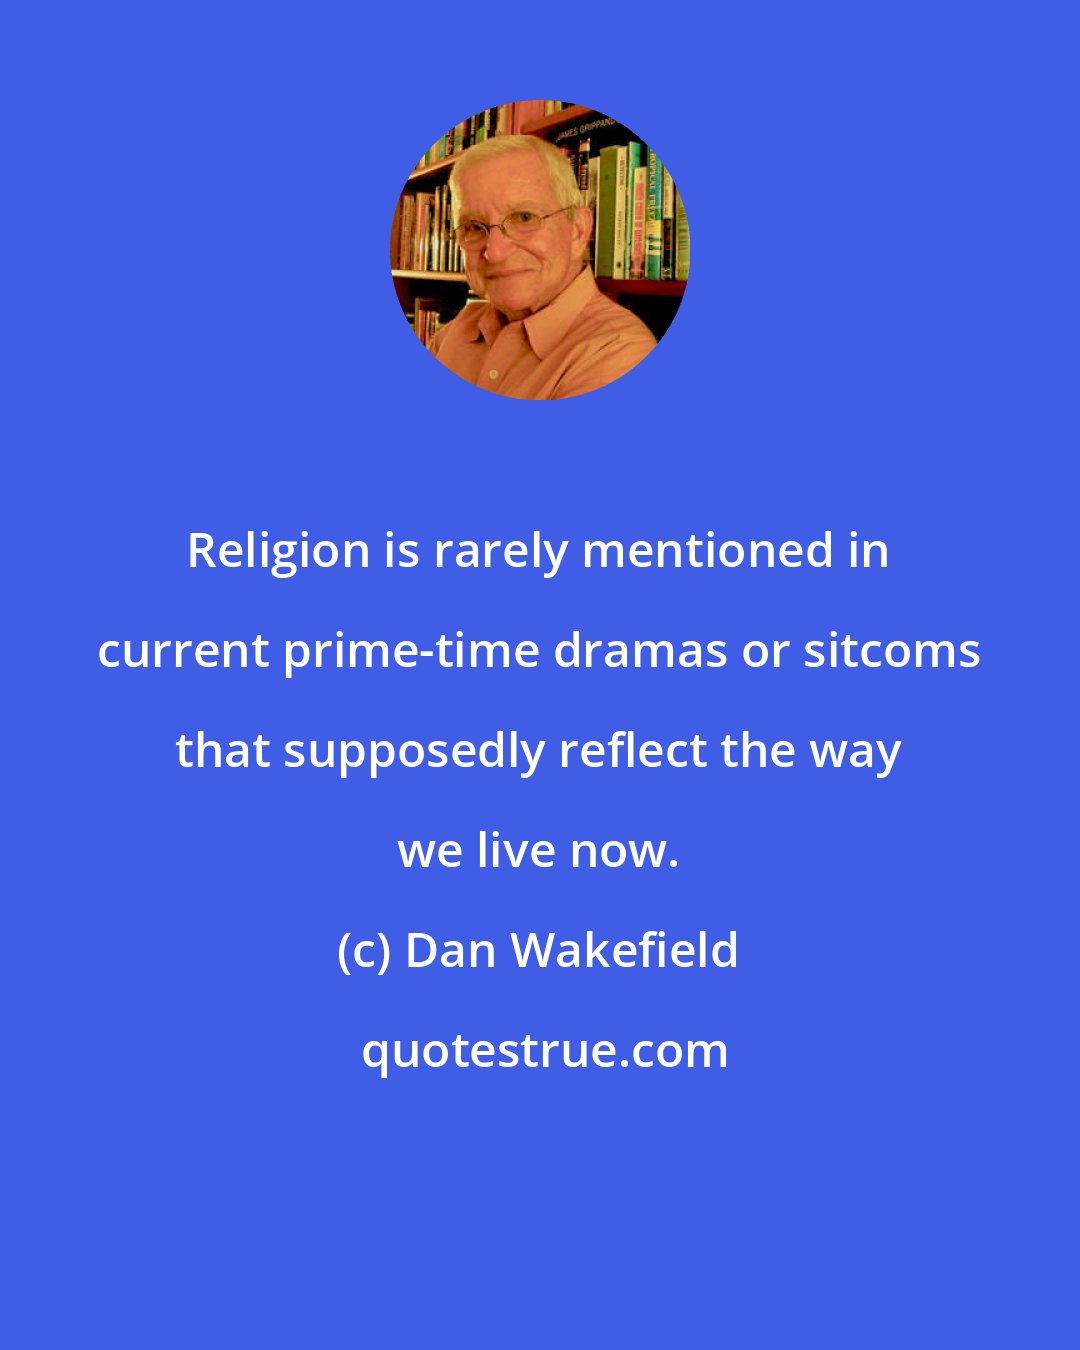 Dan Wakefield: Religion is rarely mentioned in current prime-time dramas or sitcoms that supposedly reflect the way we live now.